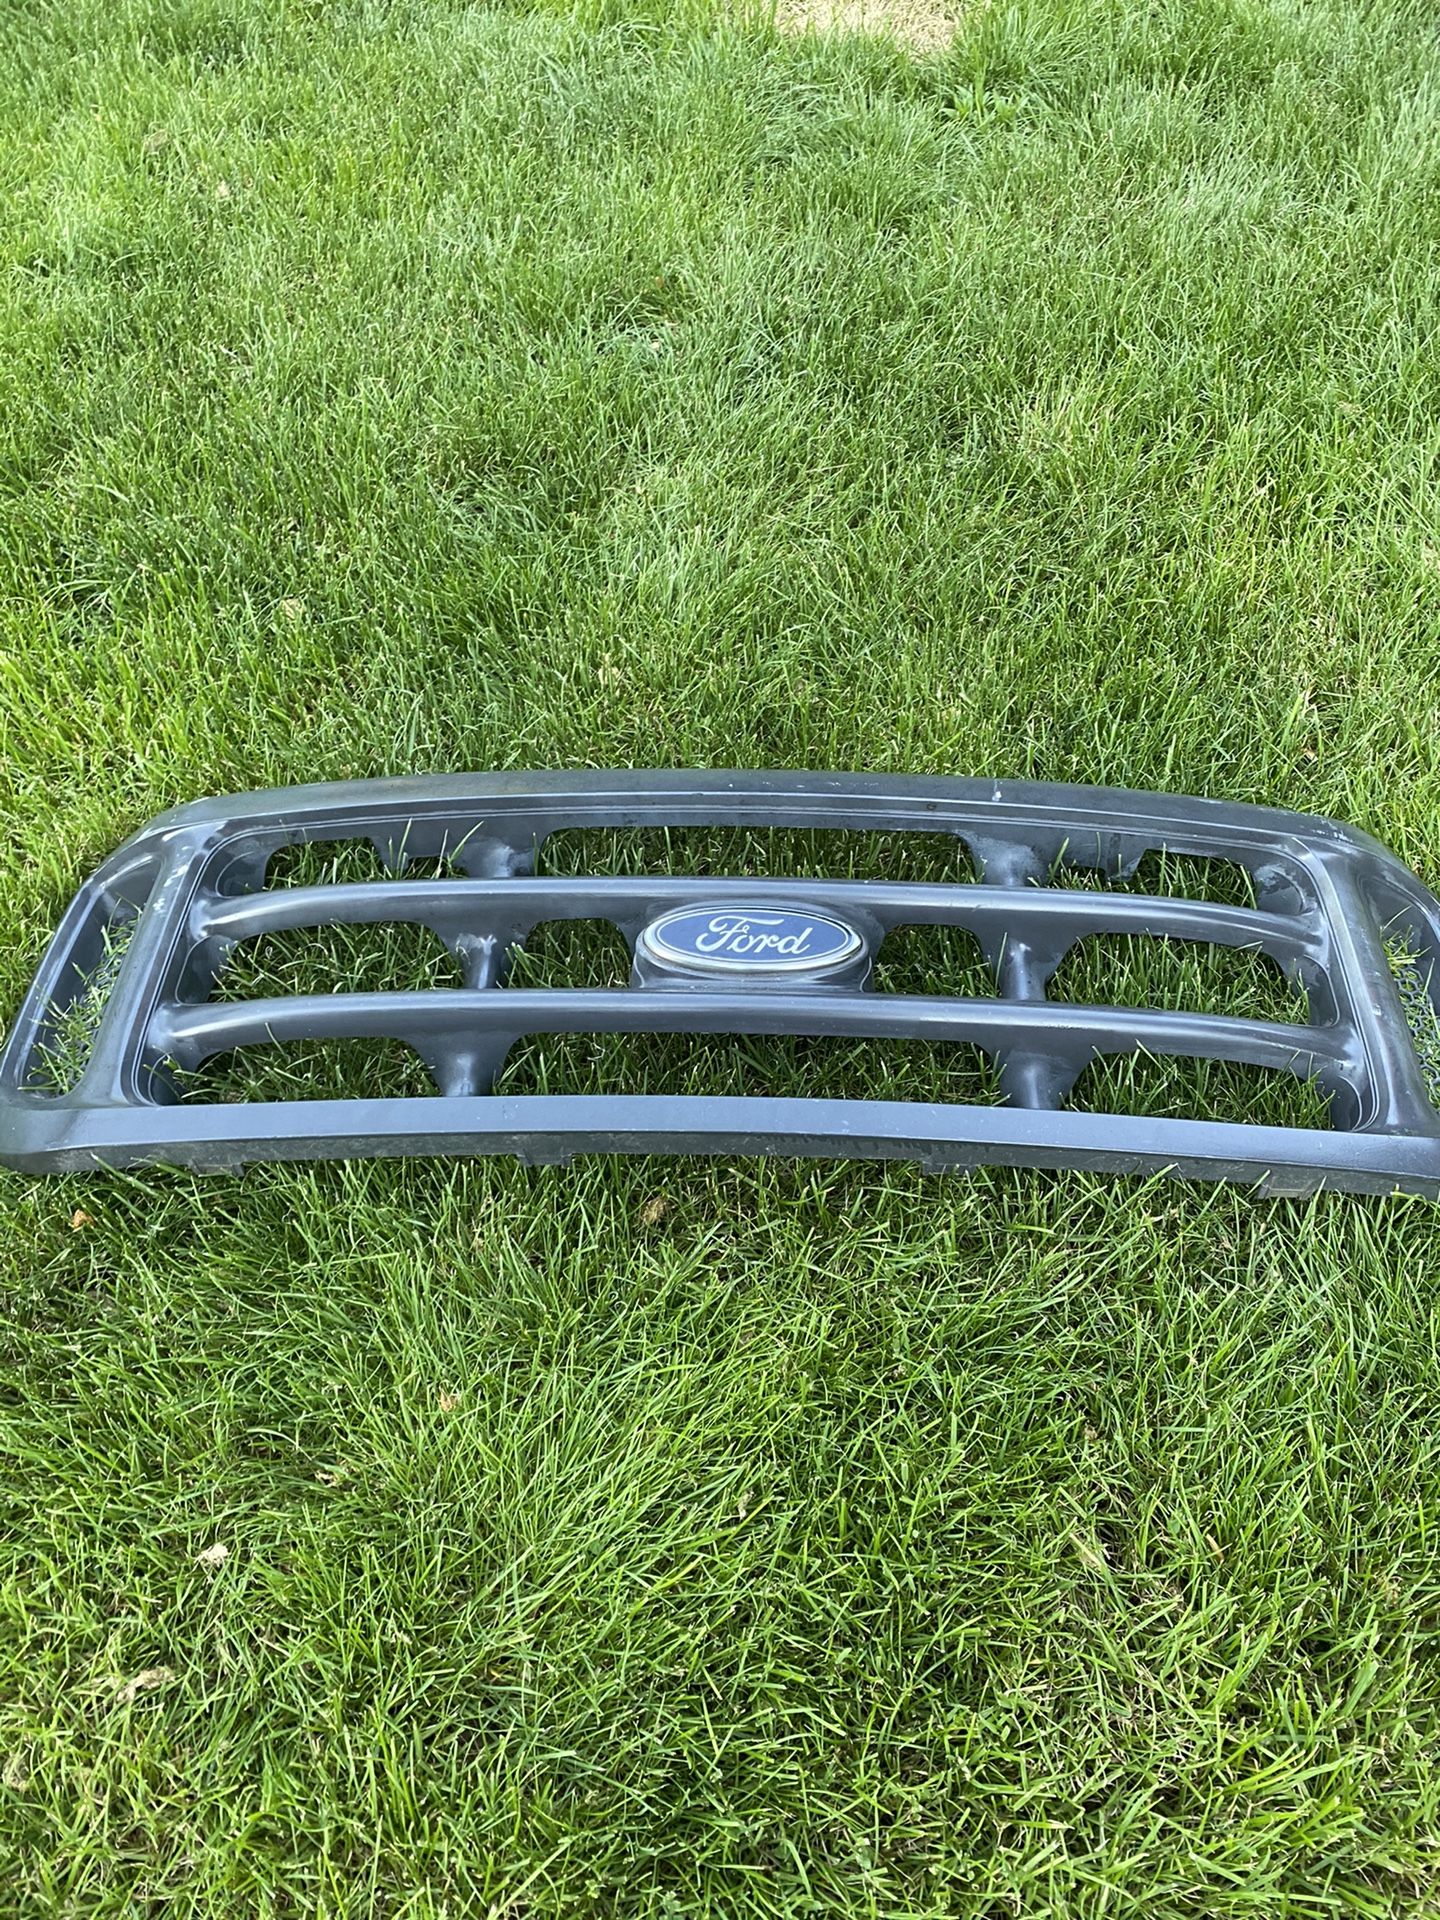 OEM Ford Grille, 1999-2004 Ford F-250 Super Duty